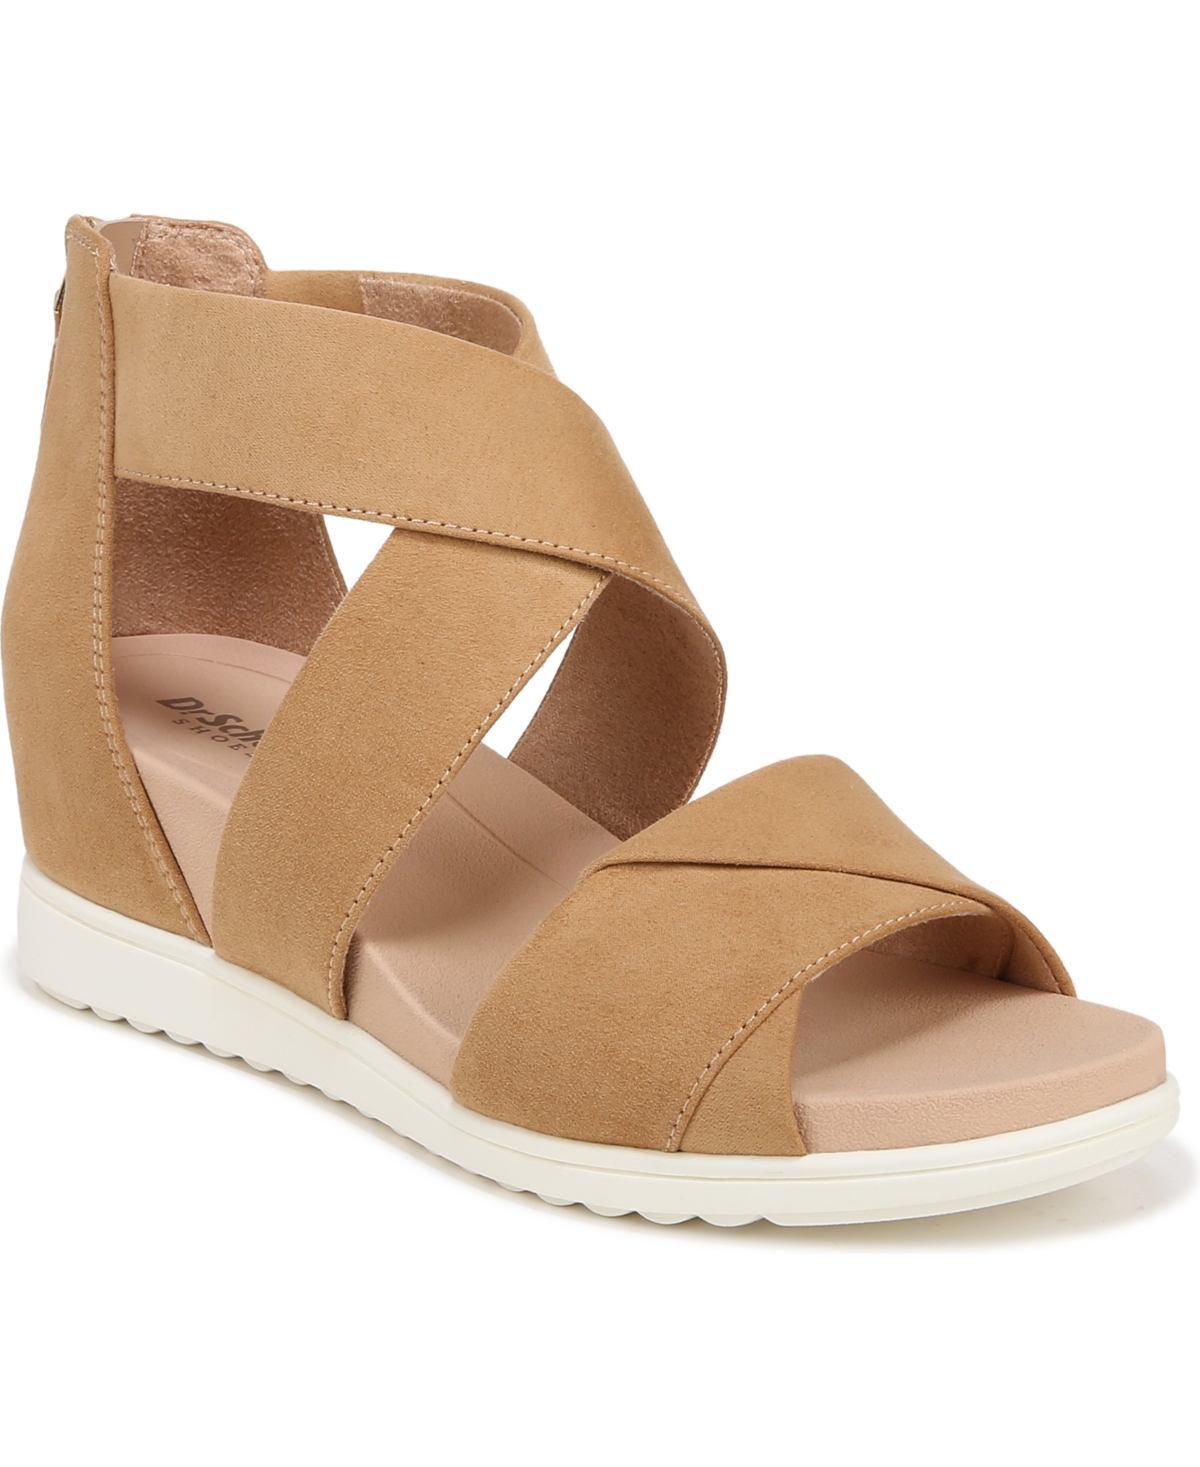 Dr. Scholl's Women's Golden Hour Ankle Strap Wedge Sandals In Tan Microfiber